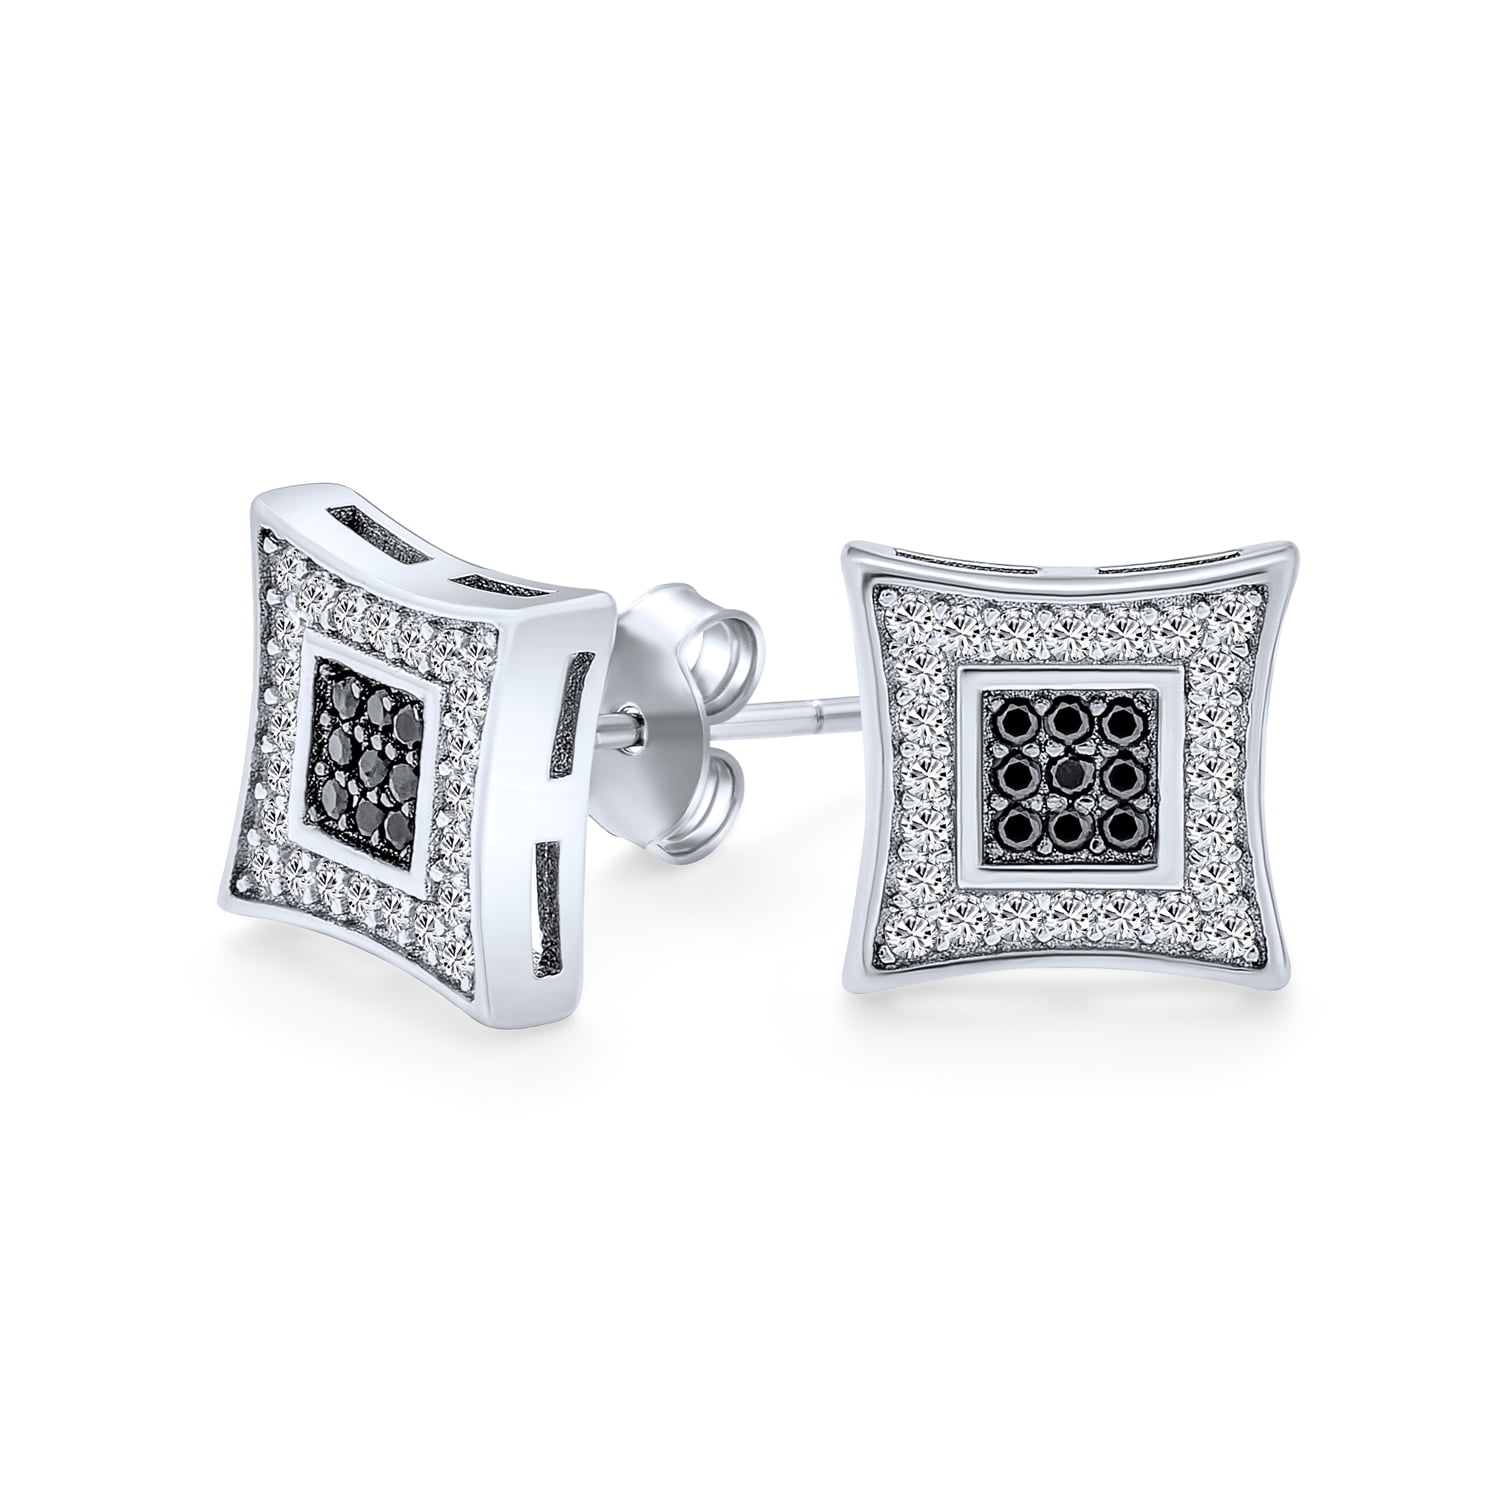 STERLING SILVER SQUARE PAVE CZ CUBIC ZIRCONIA KITE STUD EARRINGS SINGLE OR PAIR 